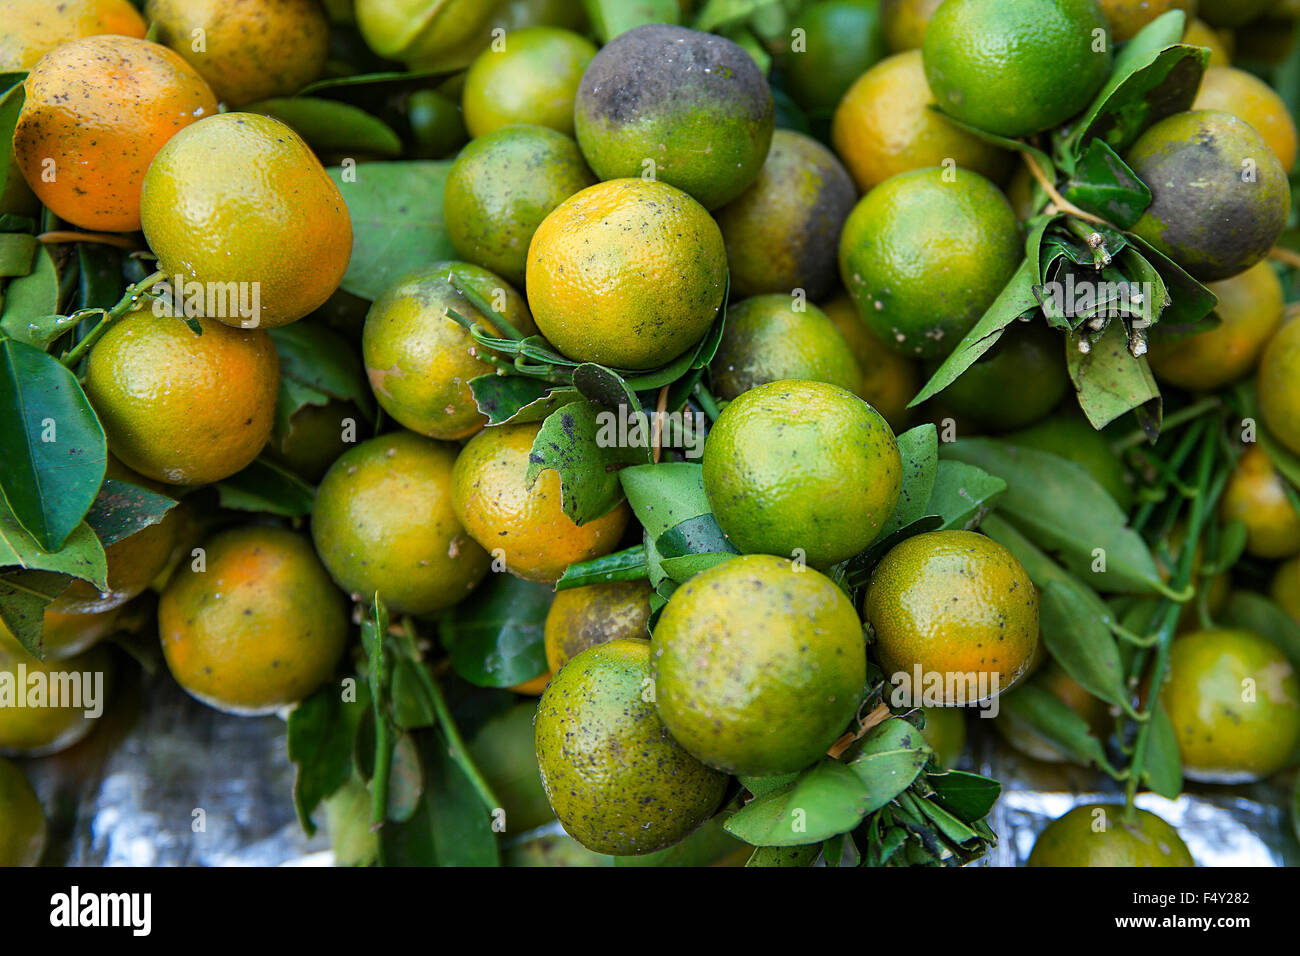 Freshly harvest Calamondin or calamansi lime selling at local sunday market. Focus pointed at the center and shallow DOF. Stock Photo